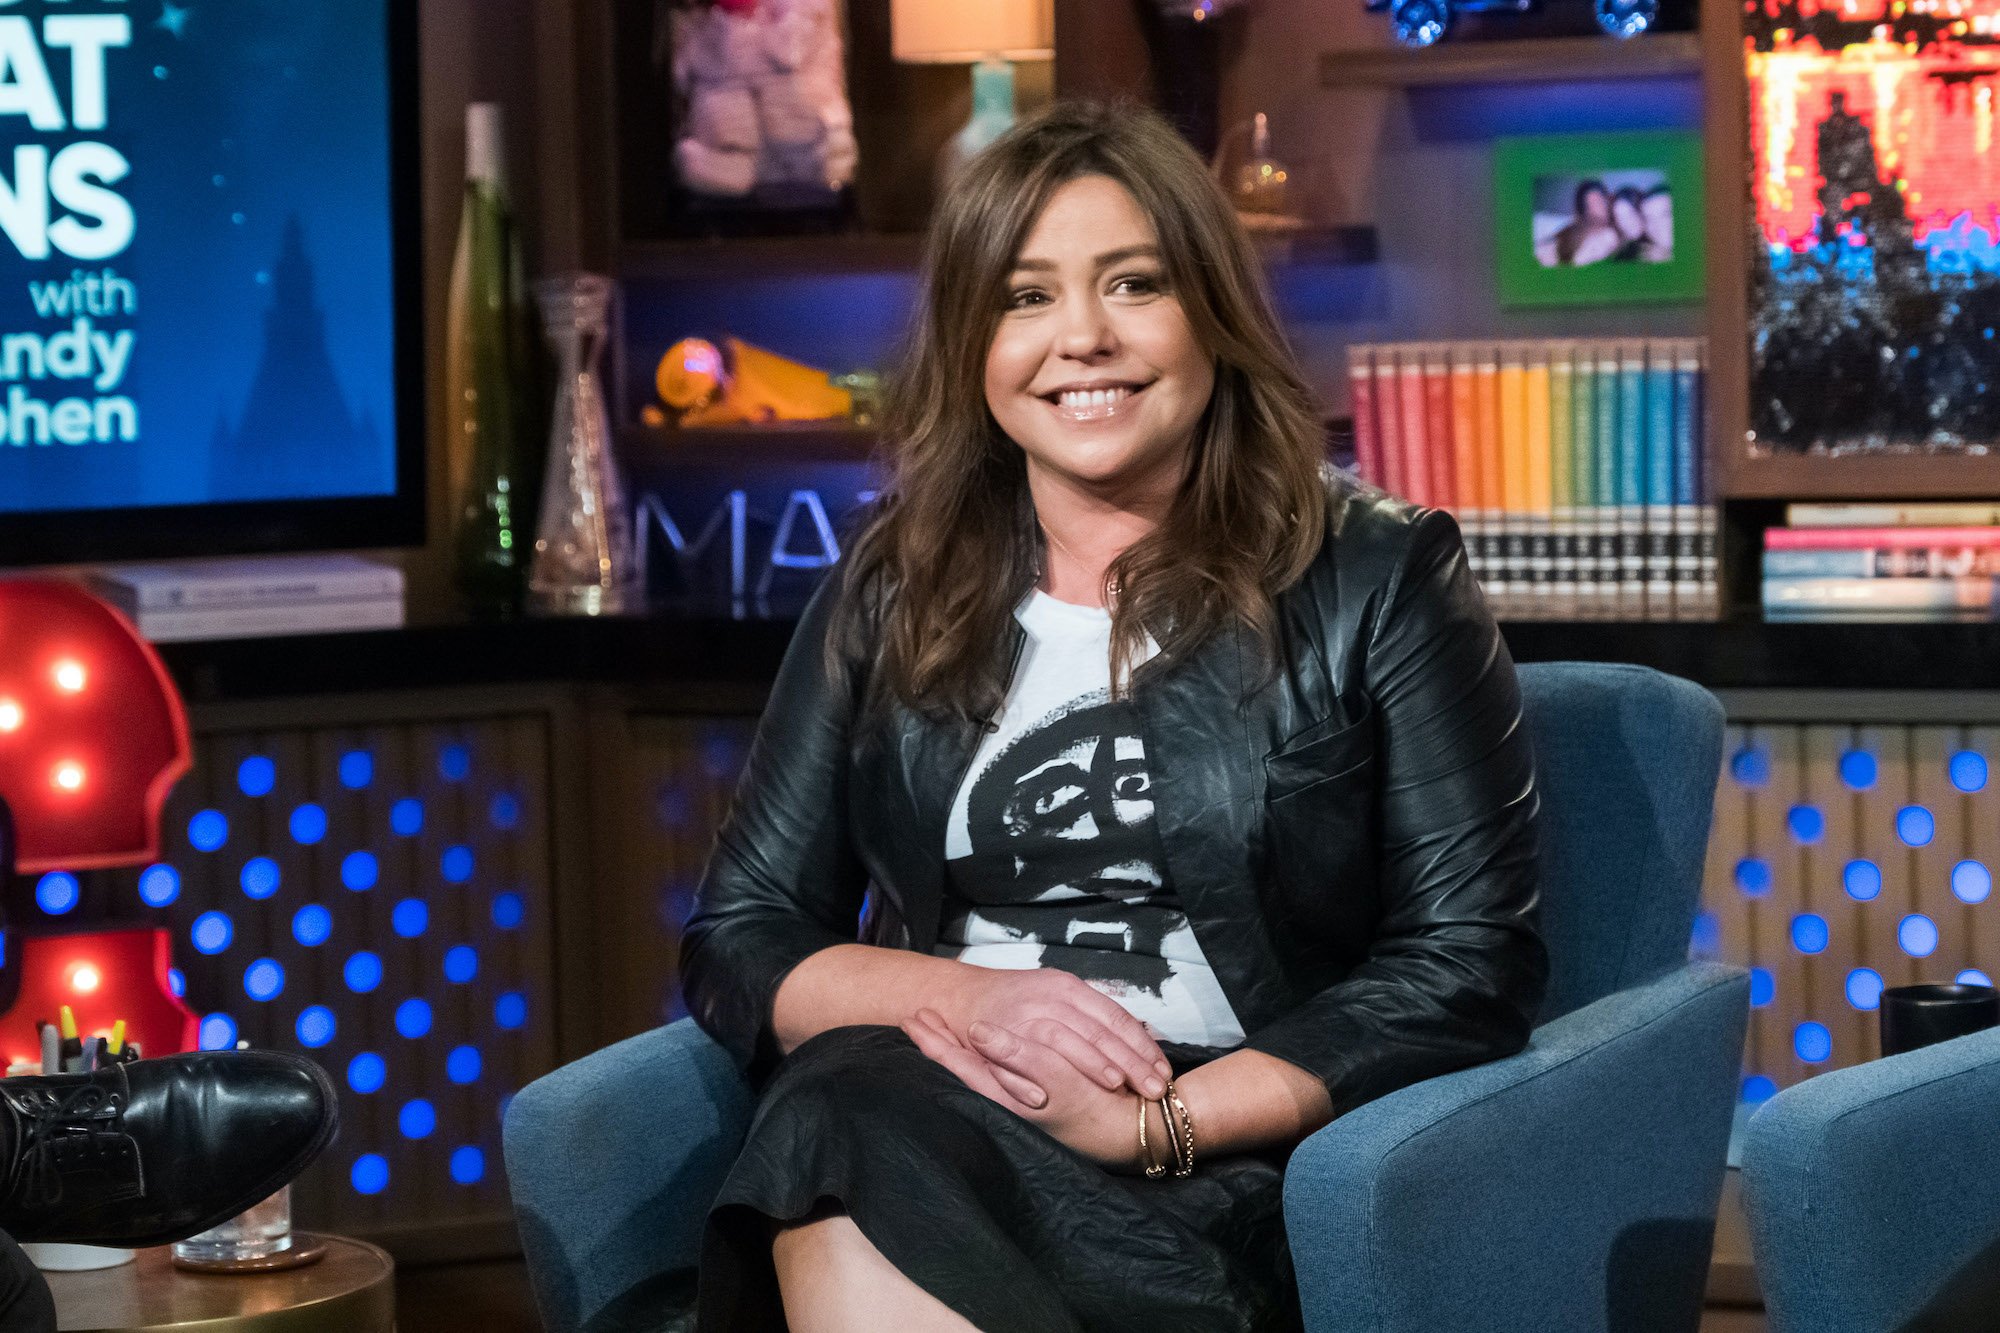 When Rachael Ray Met Her Childhood Crush She Sweated So Hard She ‘Was Pitting Out’: ‘It Was So Creepy’